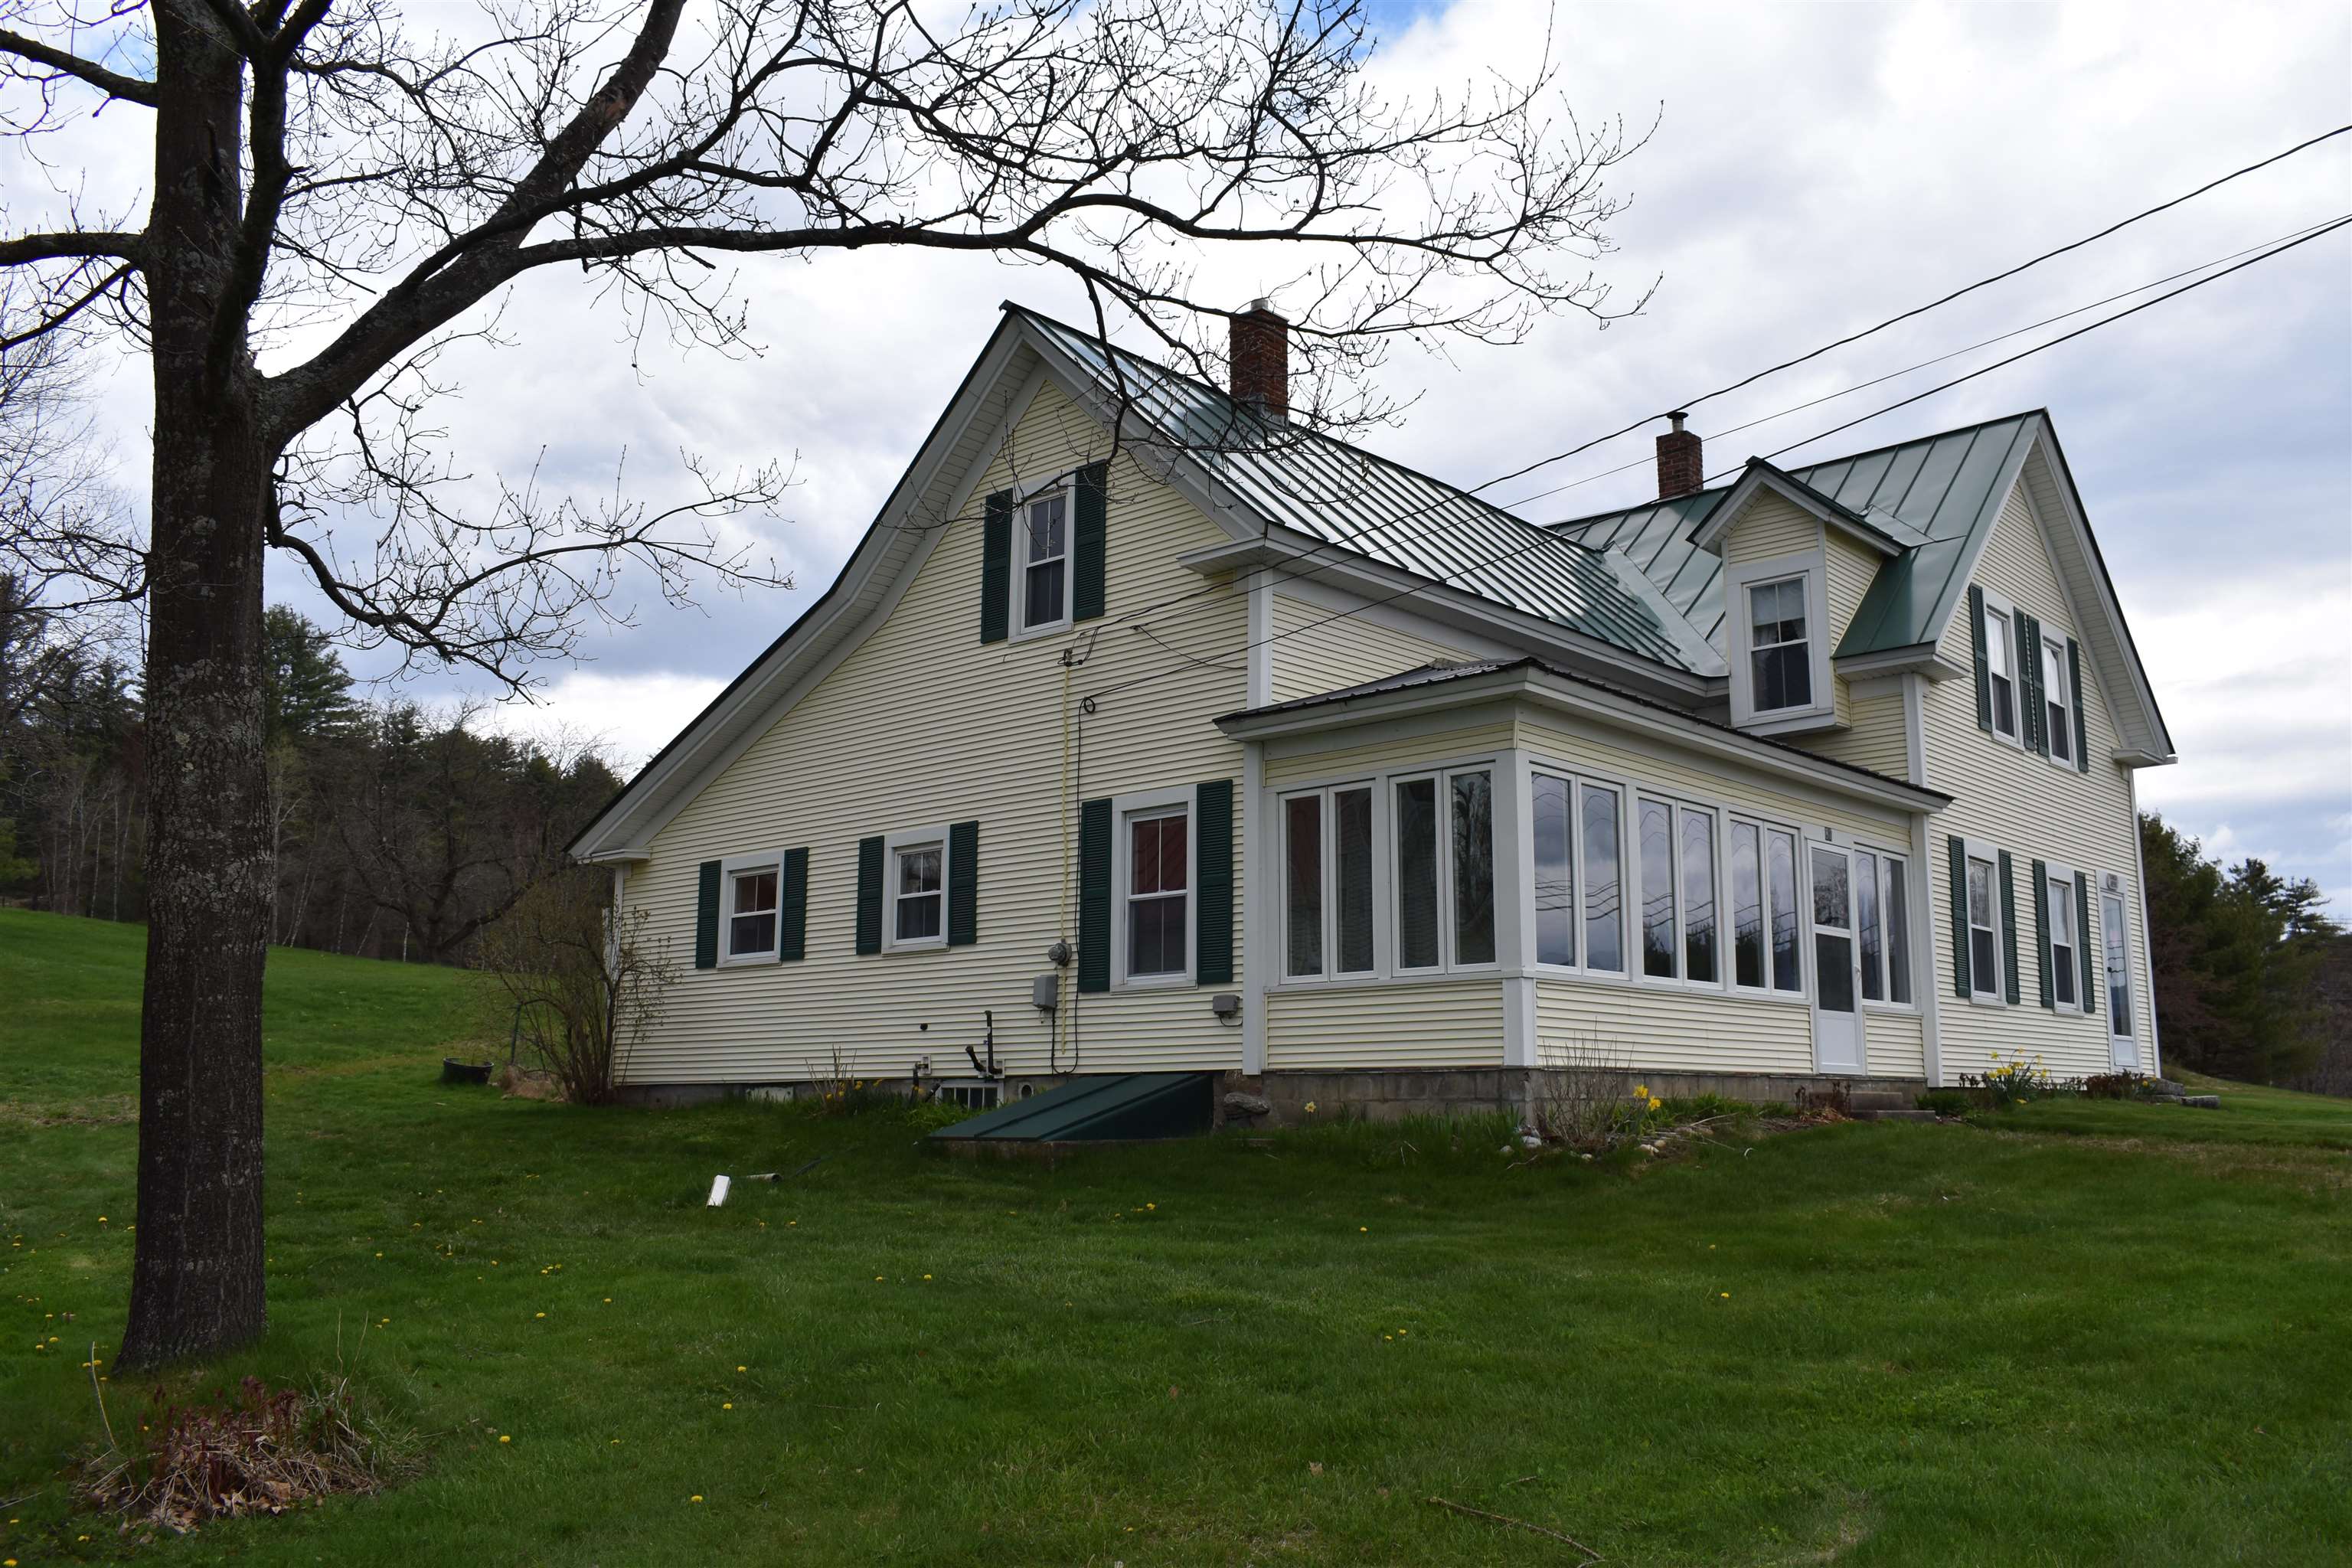 CANAAN NH Homes for sale